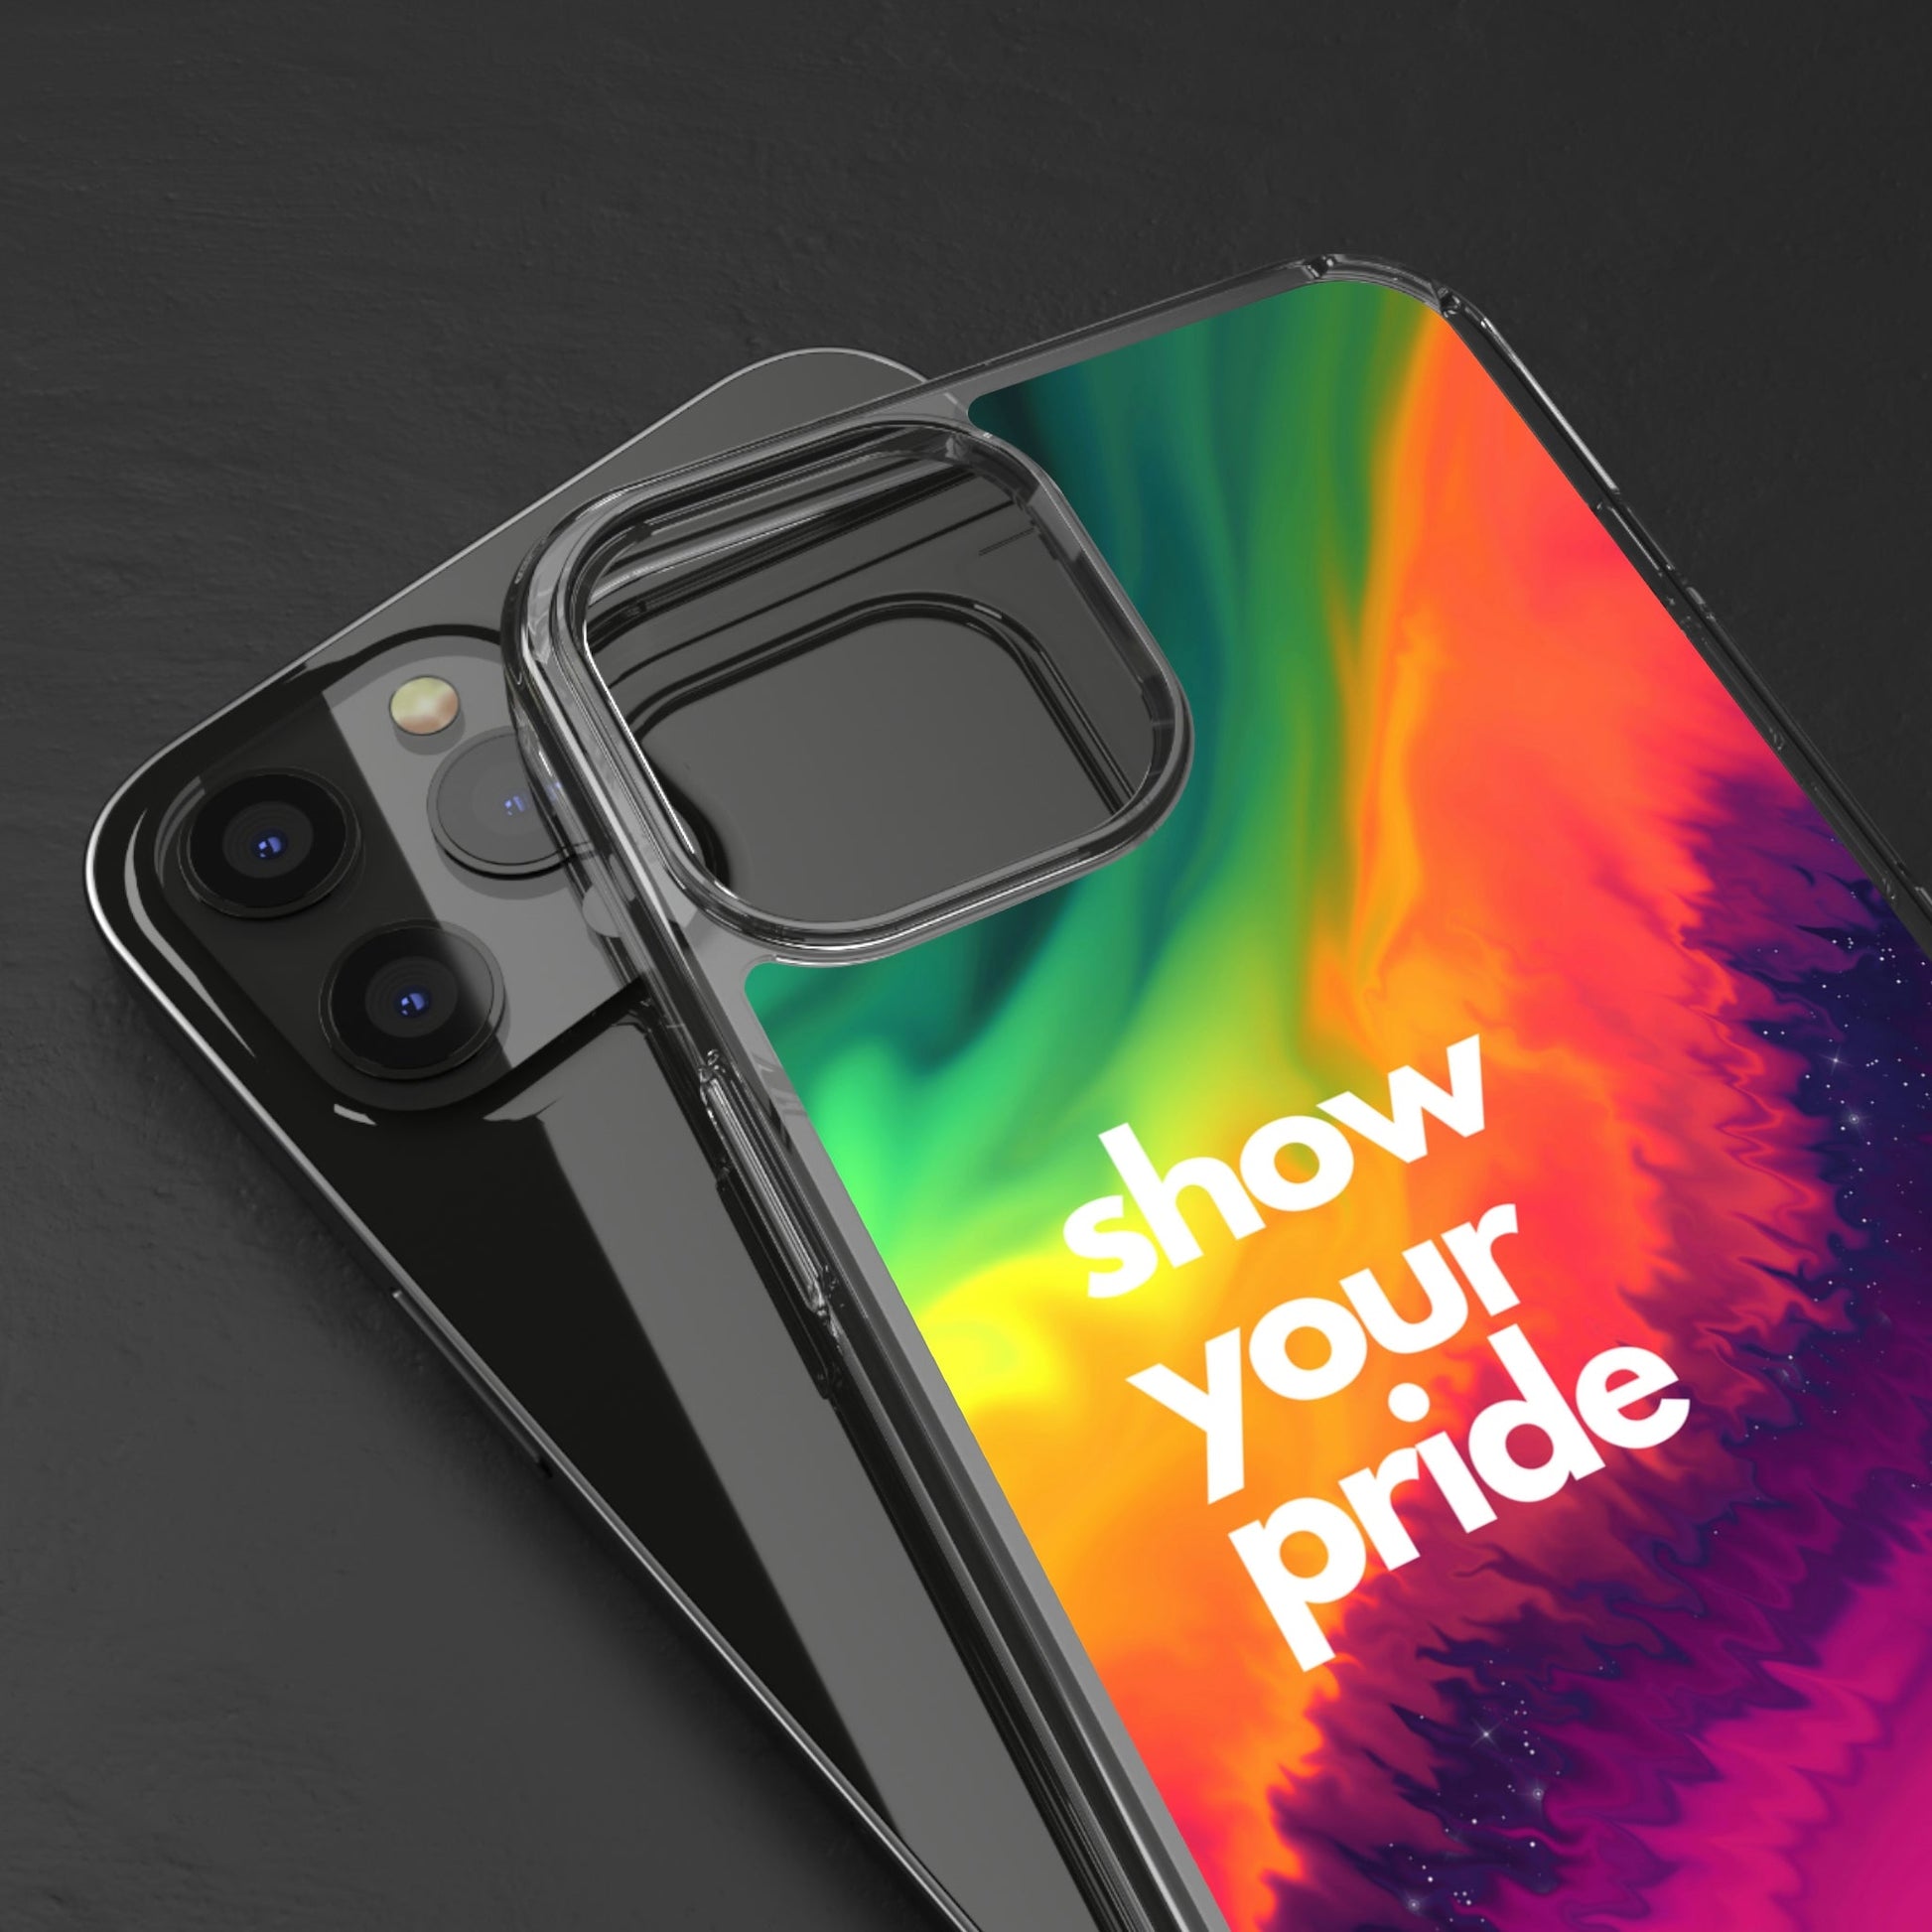 Show Your Pride Clear Case - Classy Cases